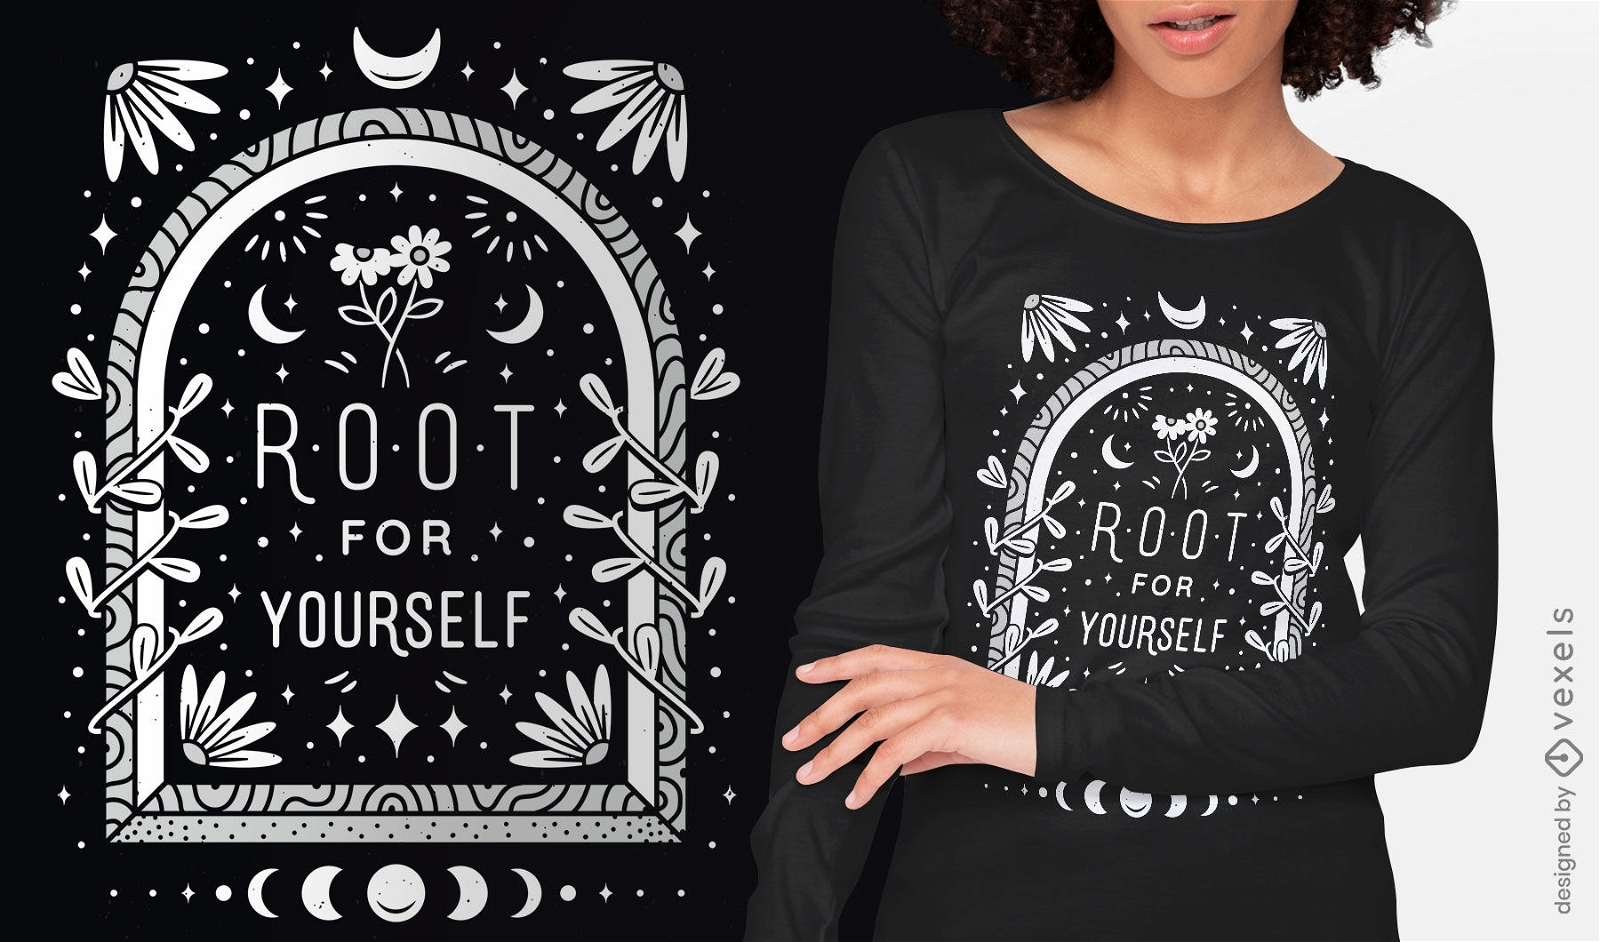 Root for yourself quote t-shirt design